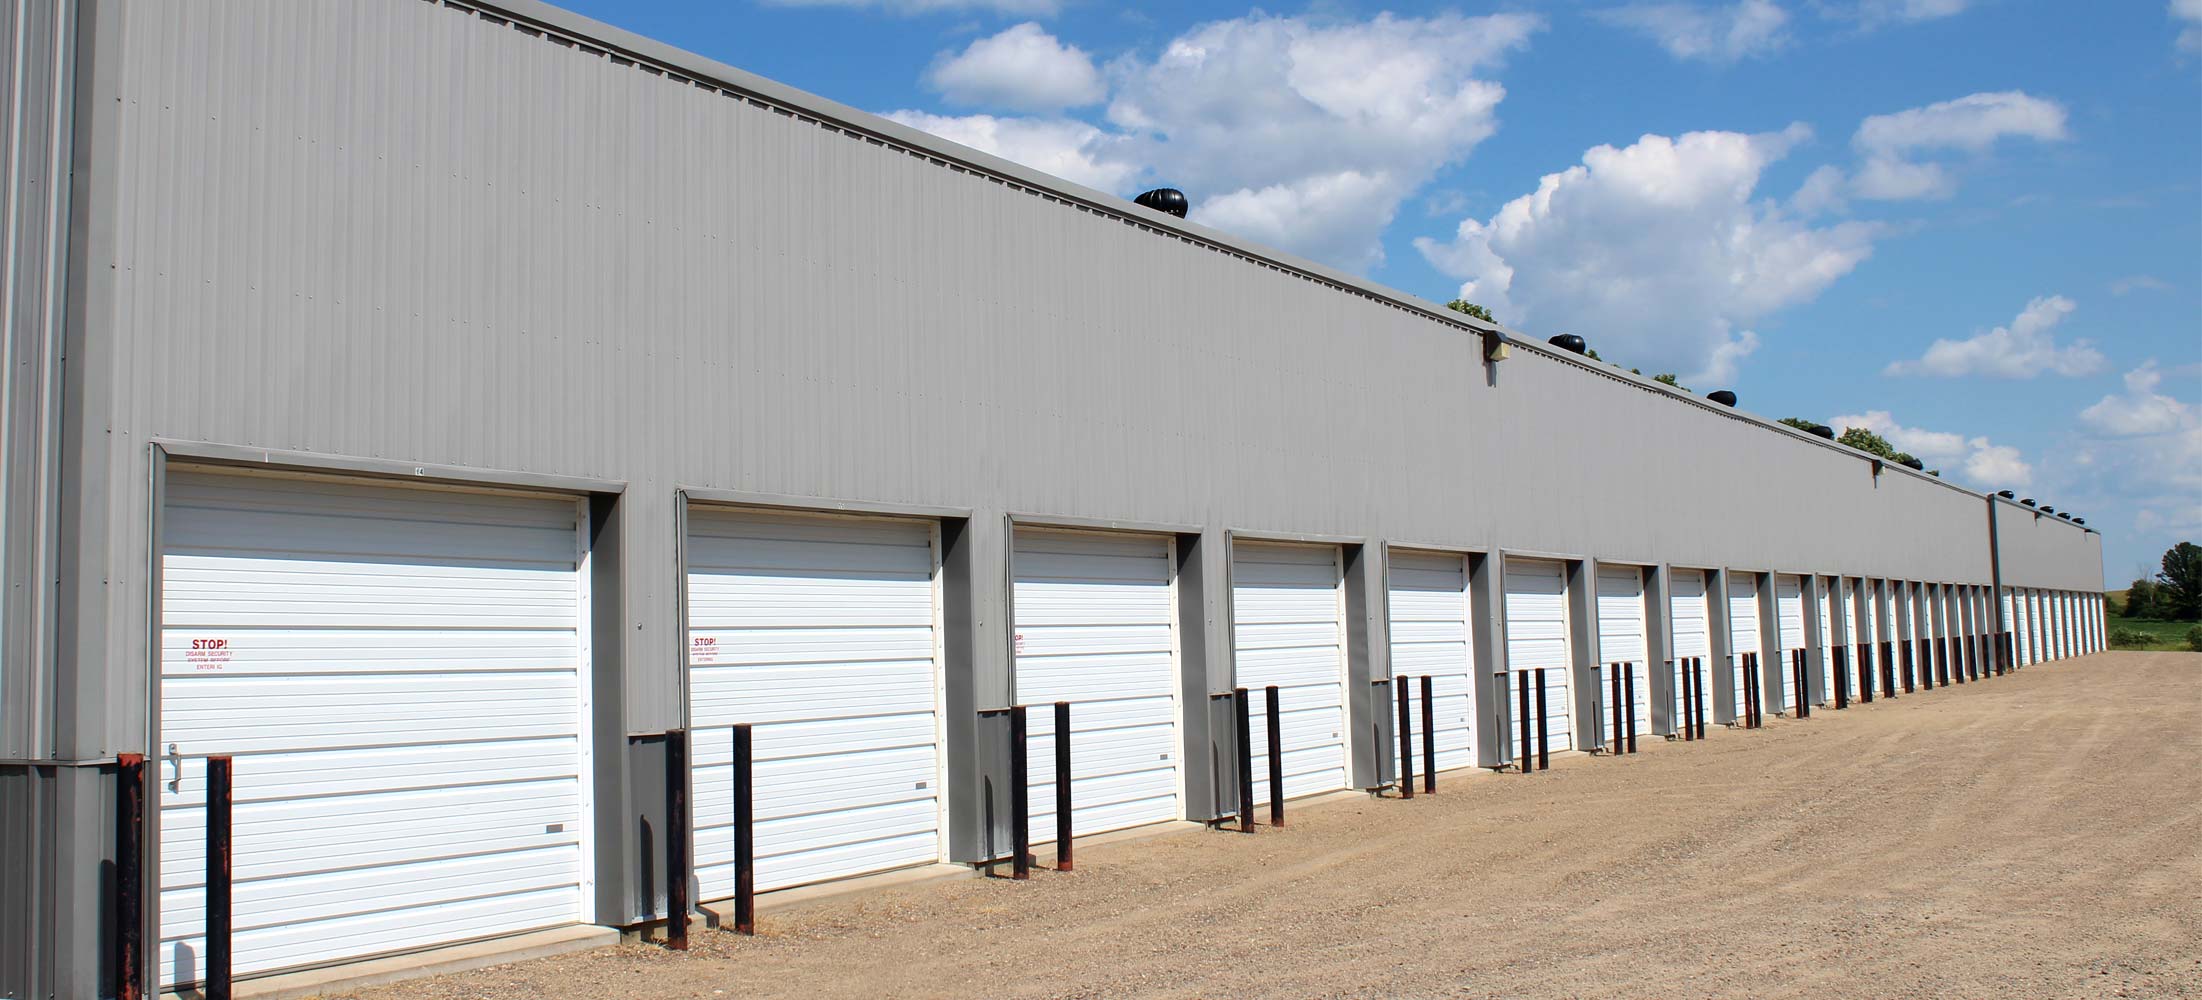 Row of overhead garage doors at Strack's Self Storage in Randall, MN